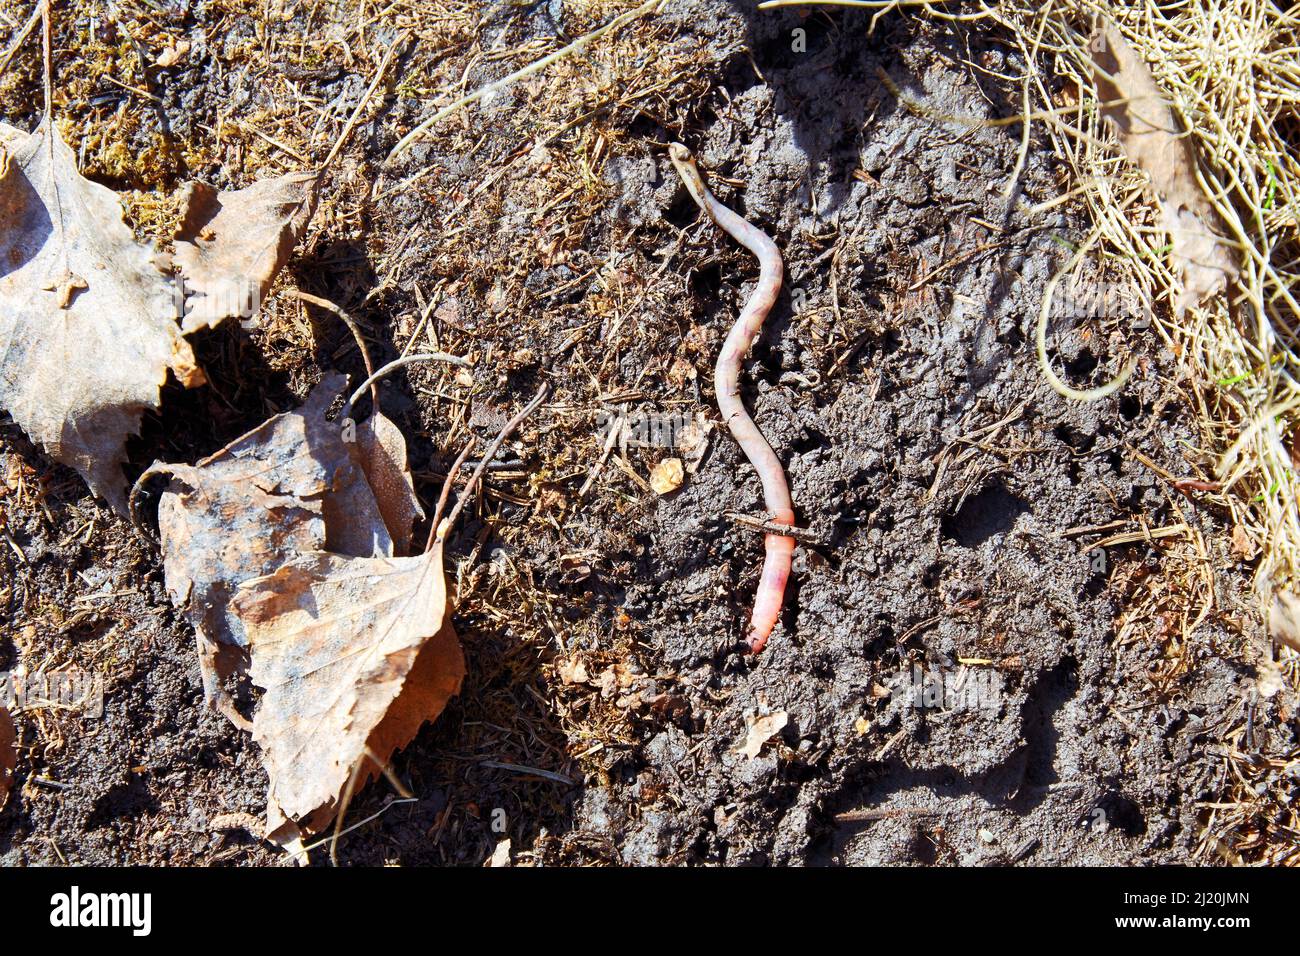 A long earthworm crawls on damp ground after winter. Wild animals in the garden Stock Photo